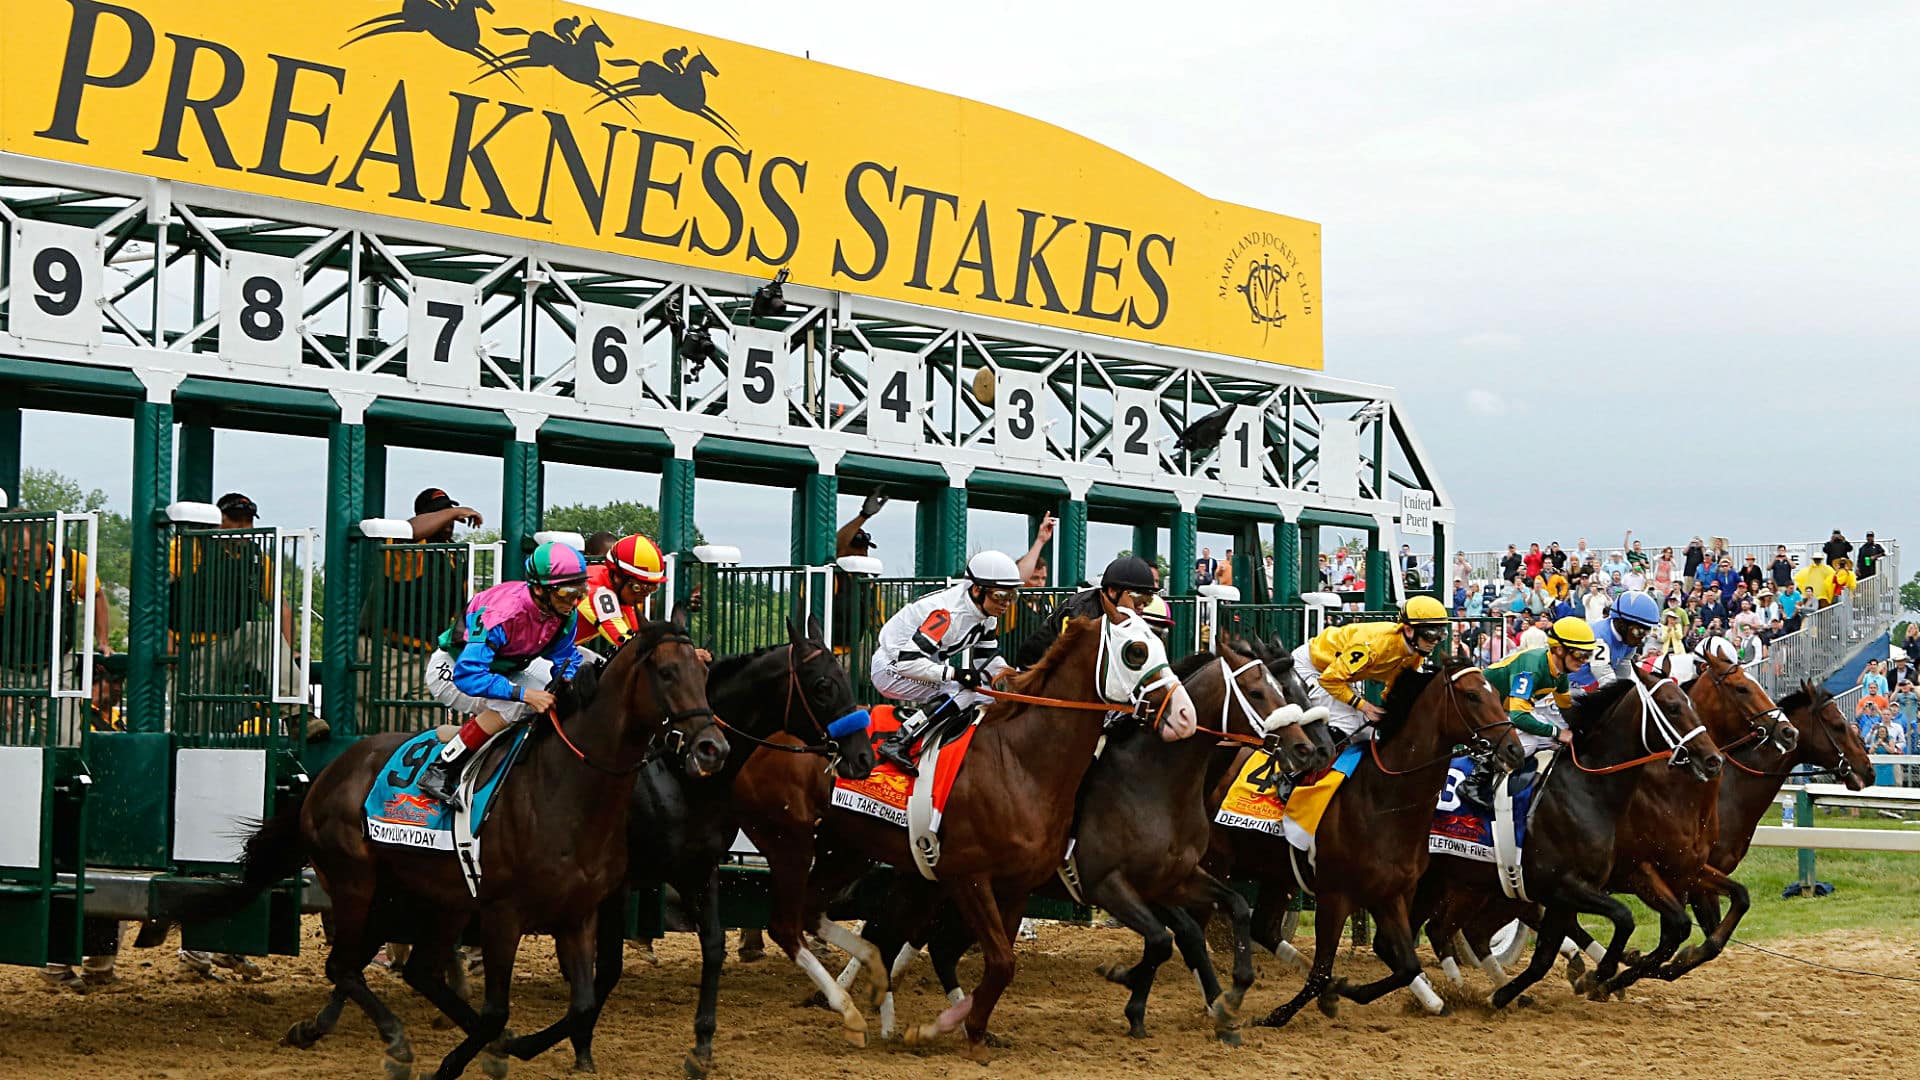 2020 Preakness Stakes oddsPick Sat,Oct 3rd